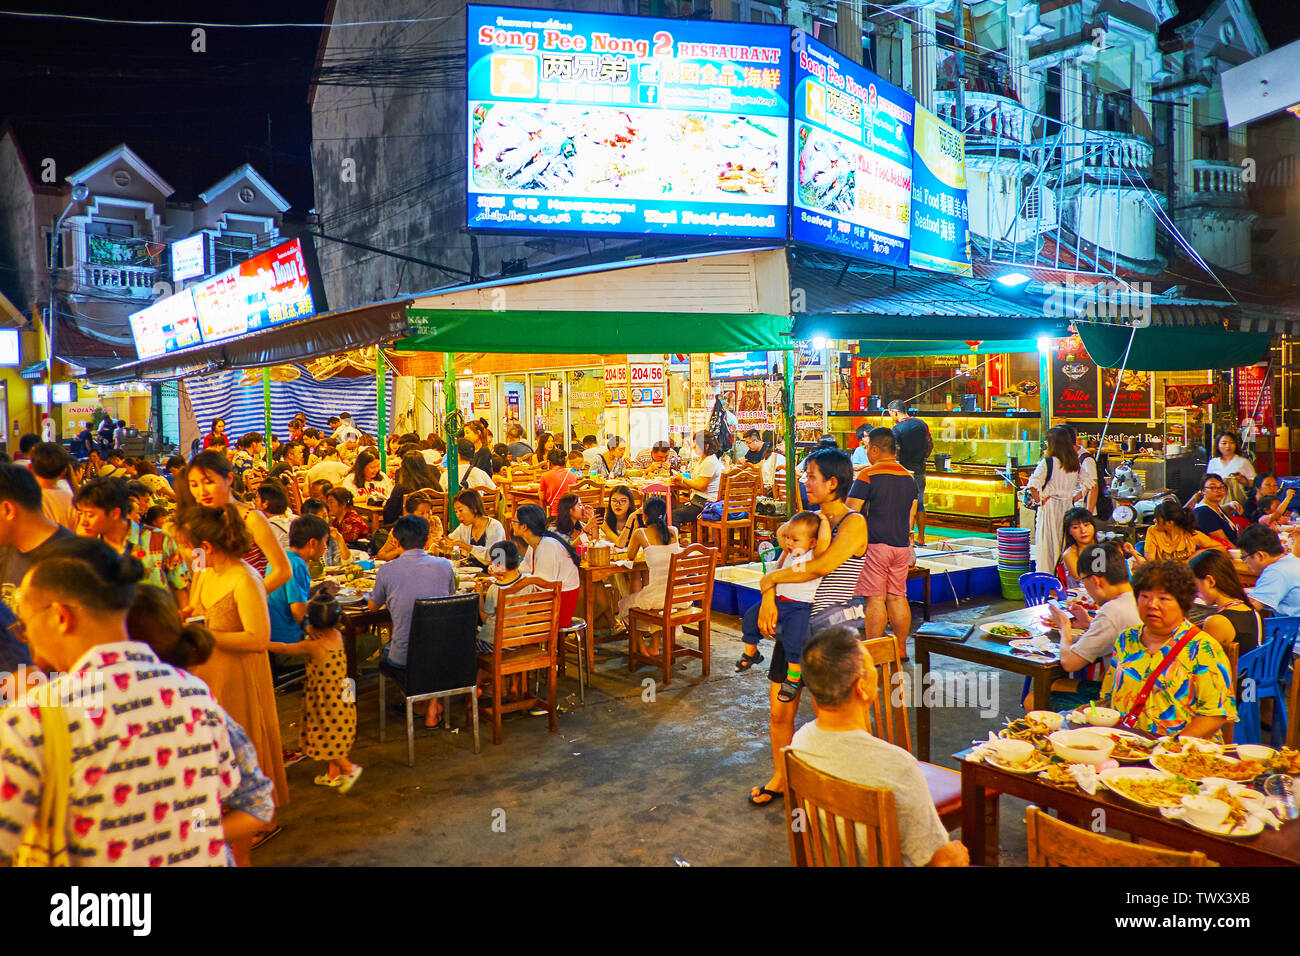 PATONG, THAILAND - MAY 1, 2019: The crowded food court of evening resort, people enjoy Thai food of local outdoor restaurants, tables and chairs occup Stock Photo